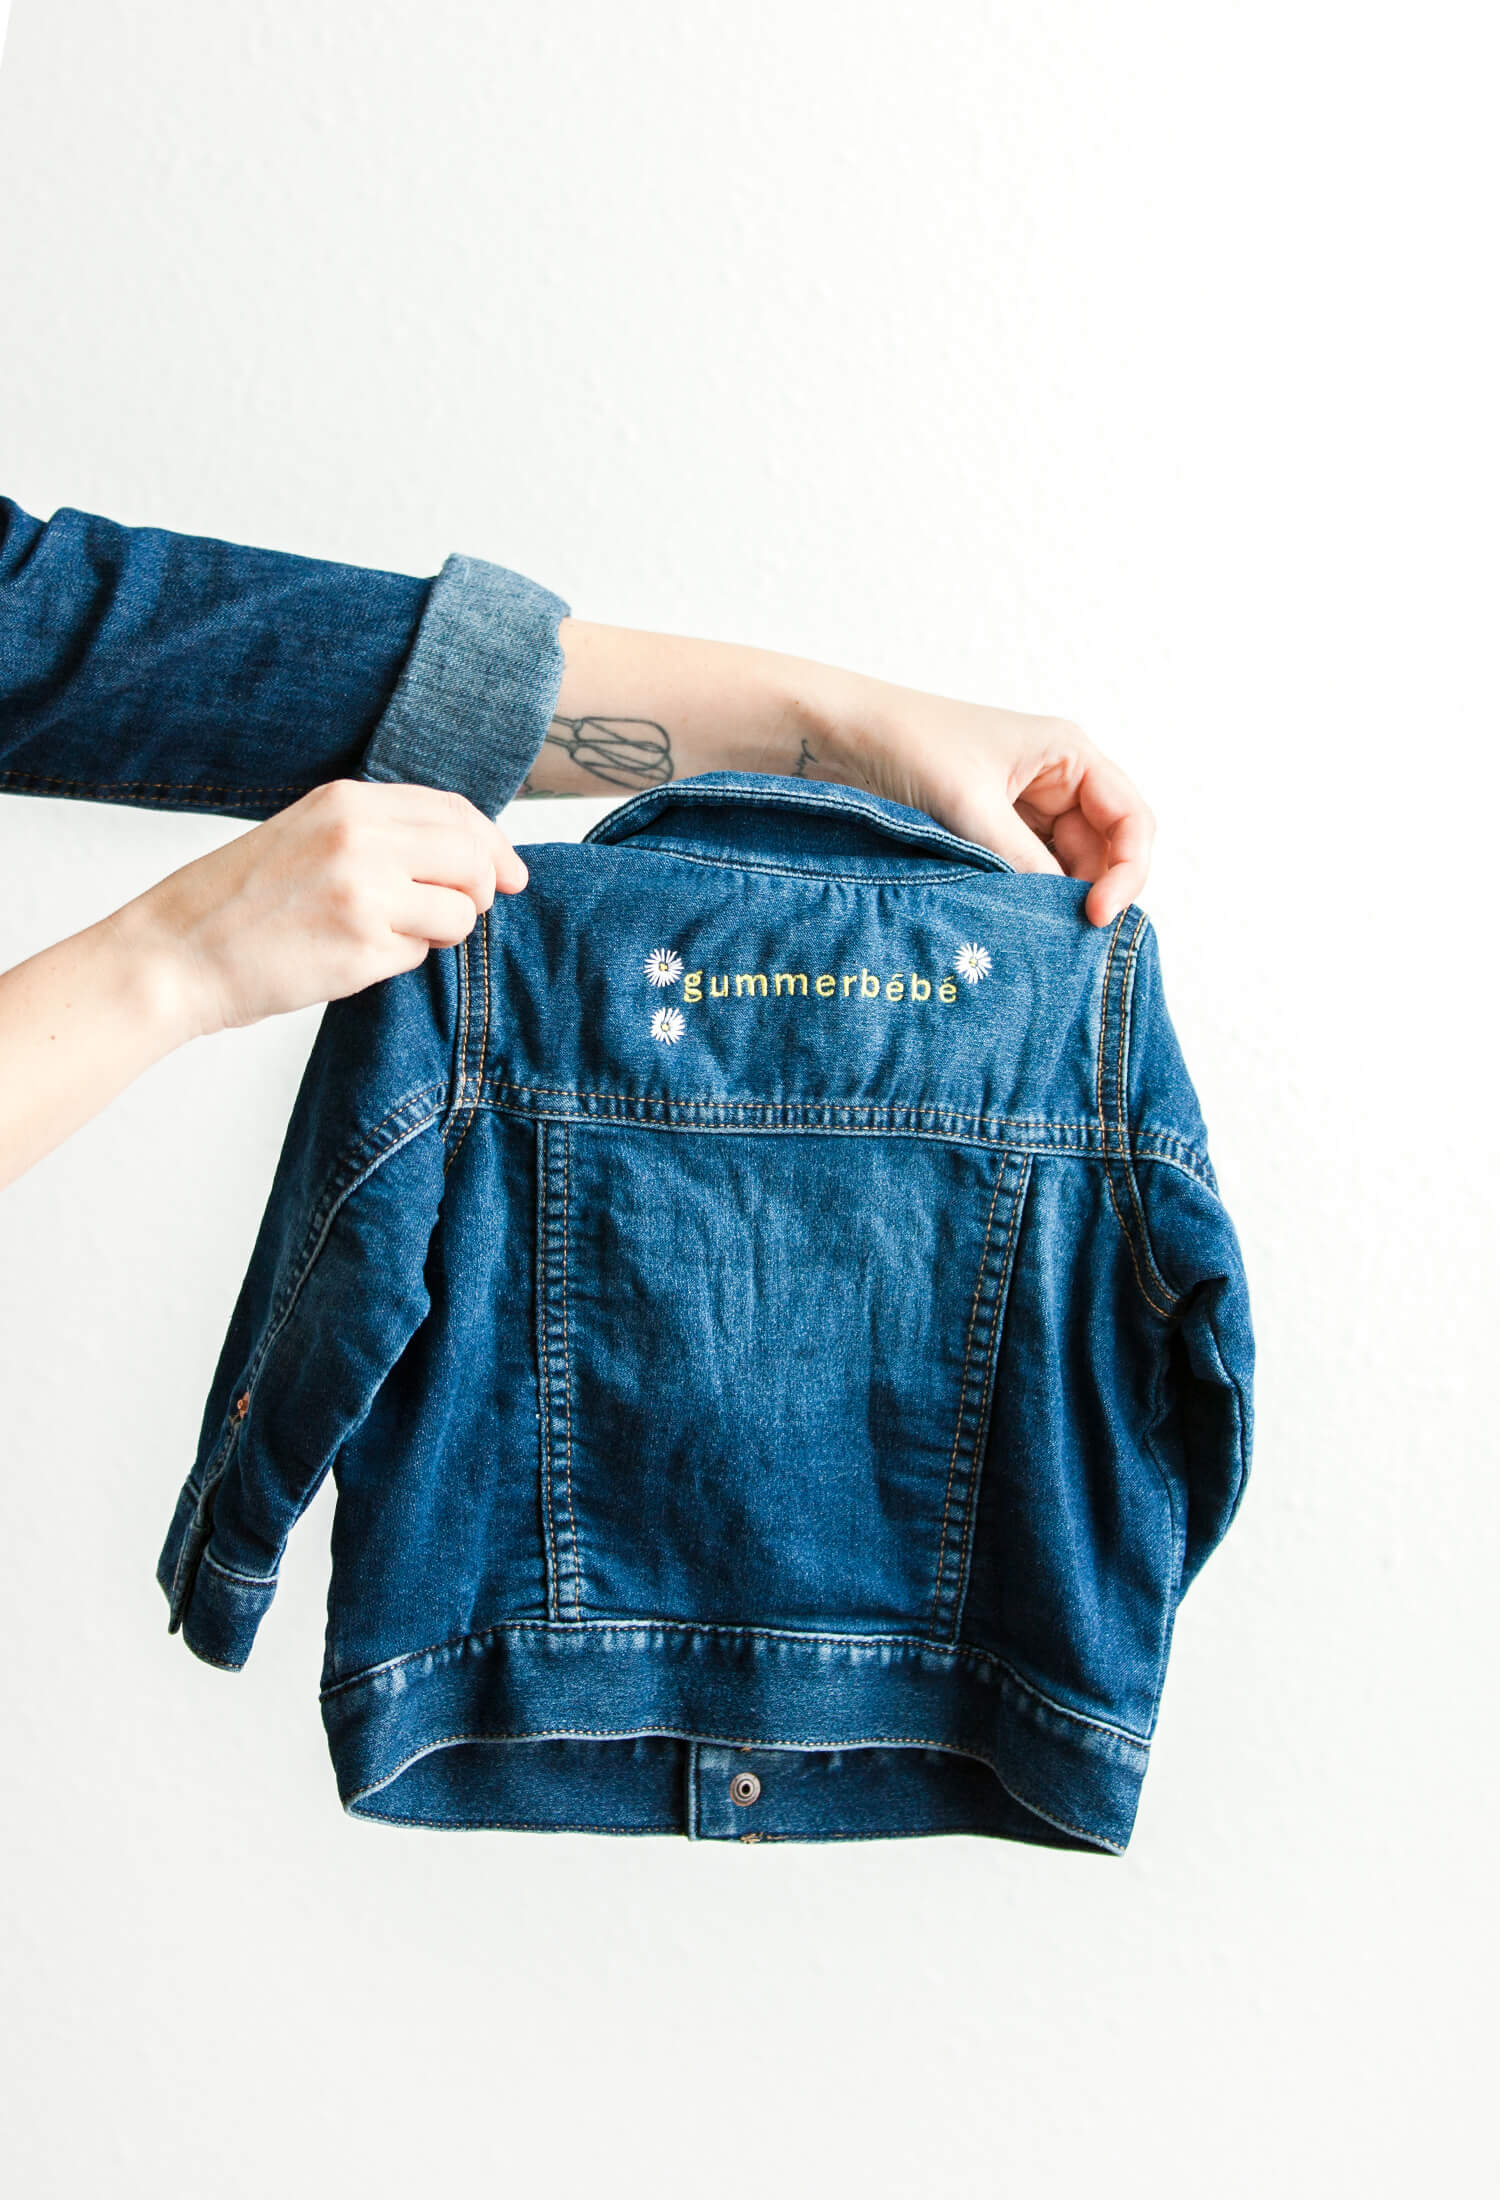 PERSONALIZE YOUR DENIM WITH EMBROIDERY! — EverSewn